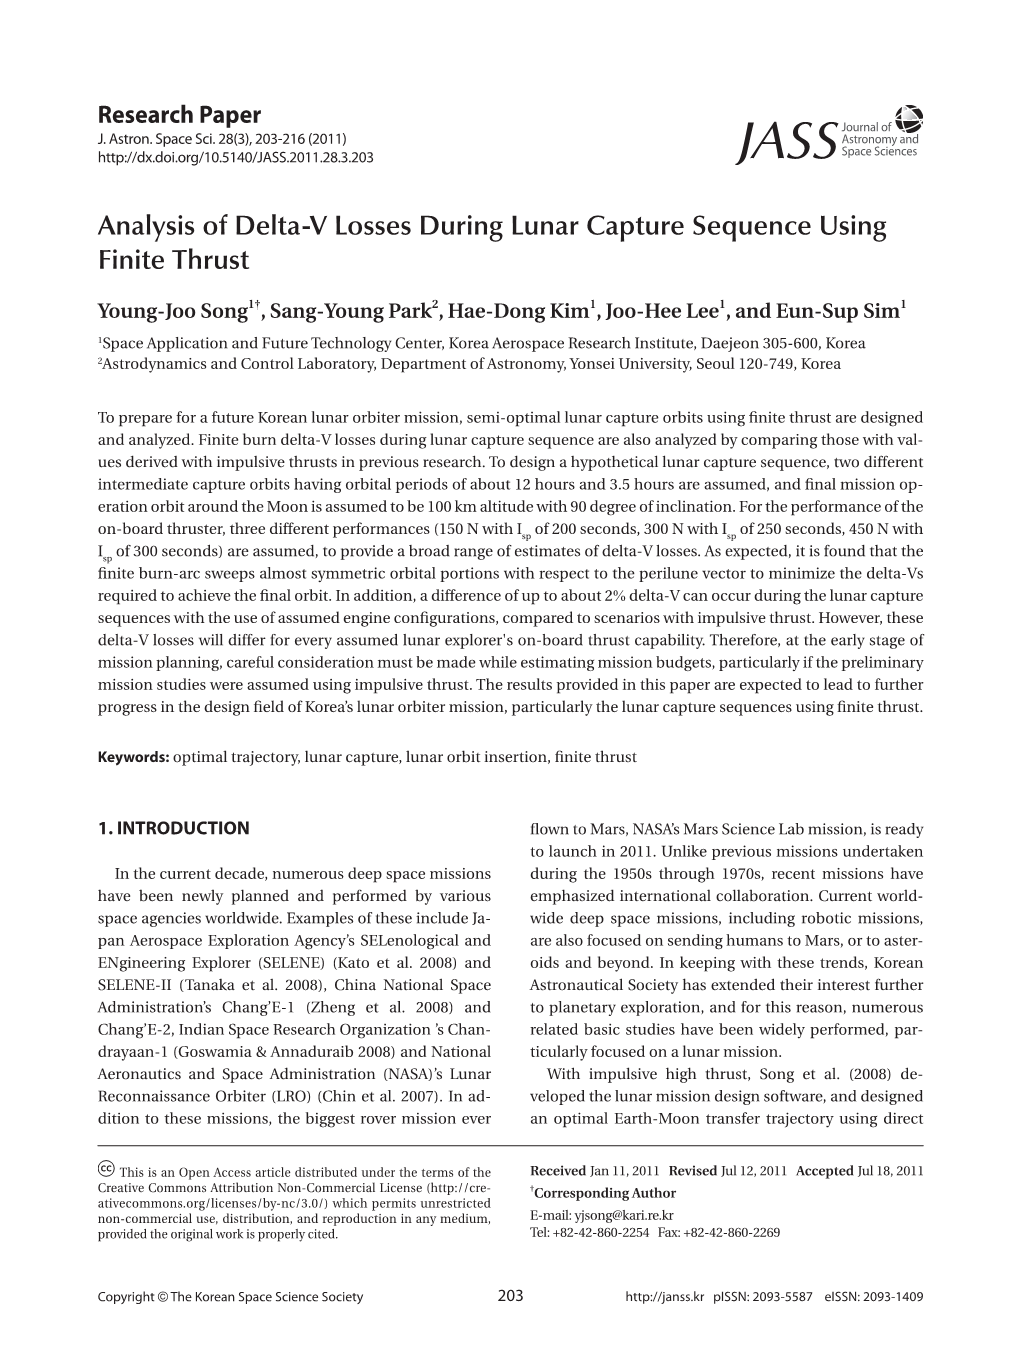 Analysis of Delta-V Losses During Lunar Capture Sequence Using Finite Thrust